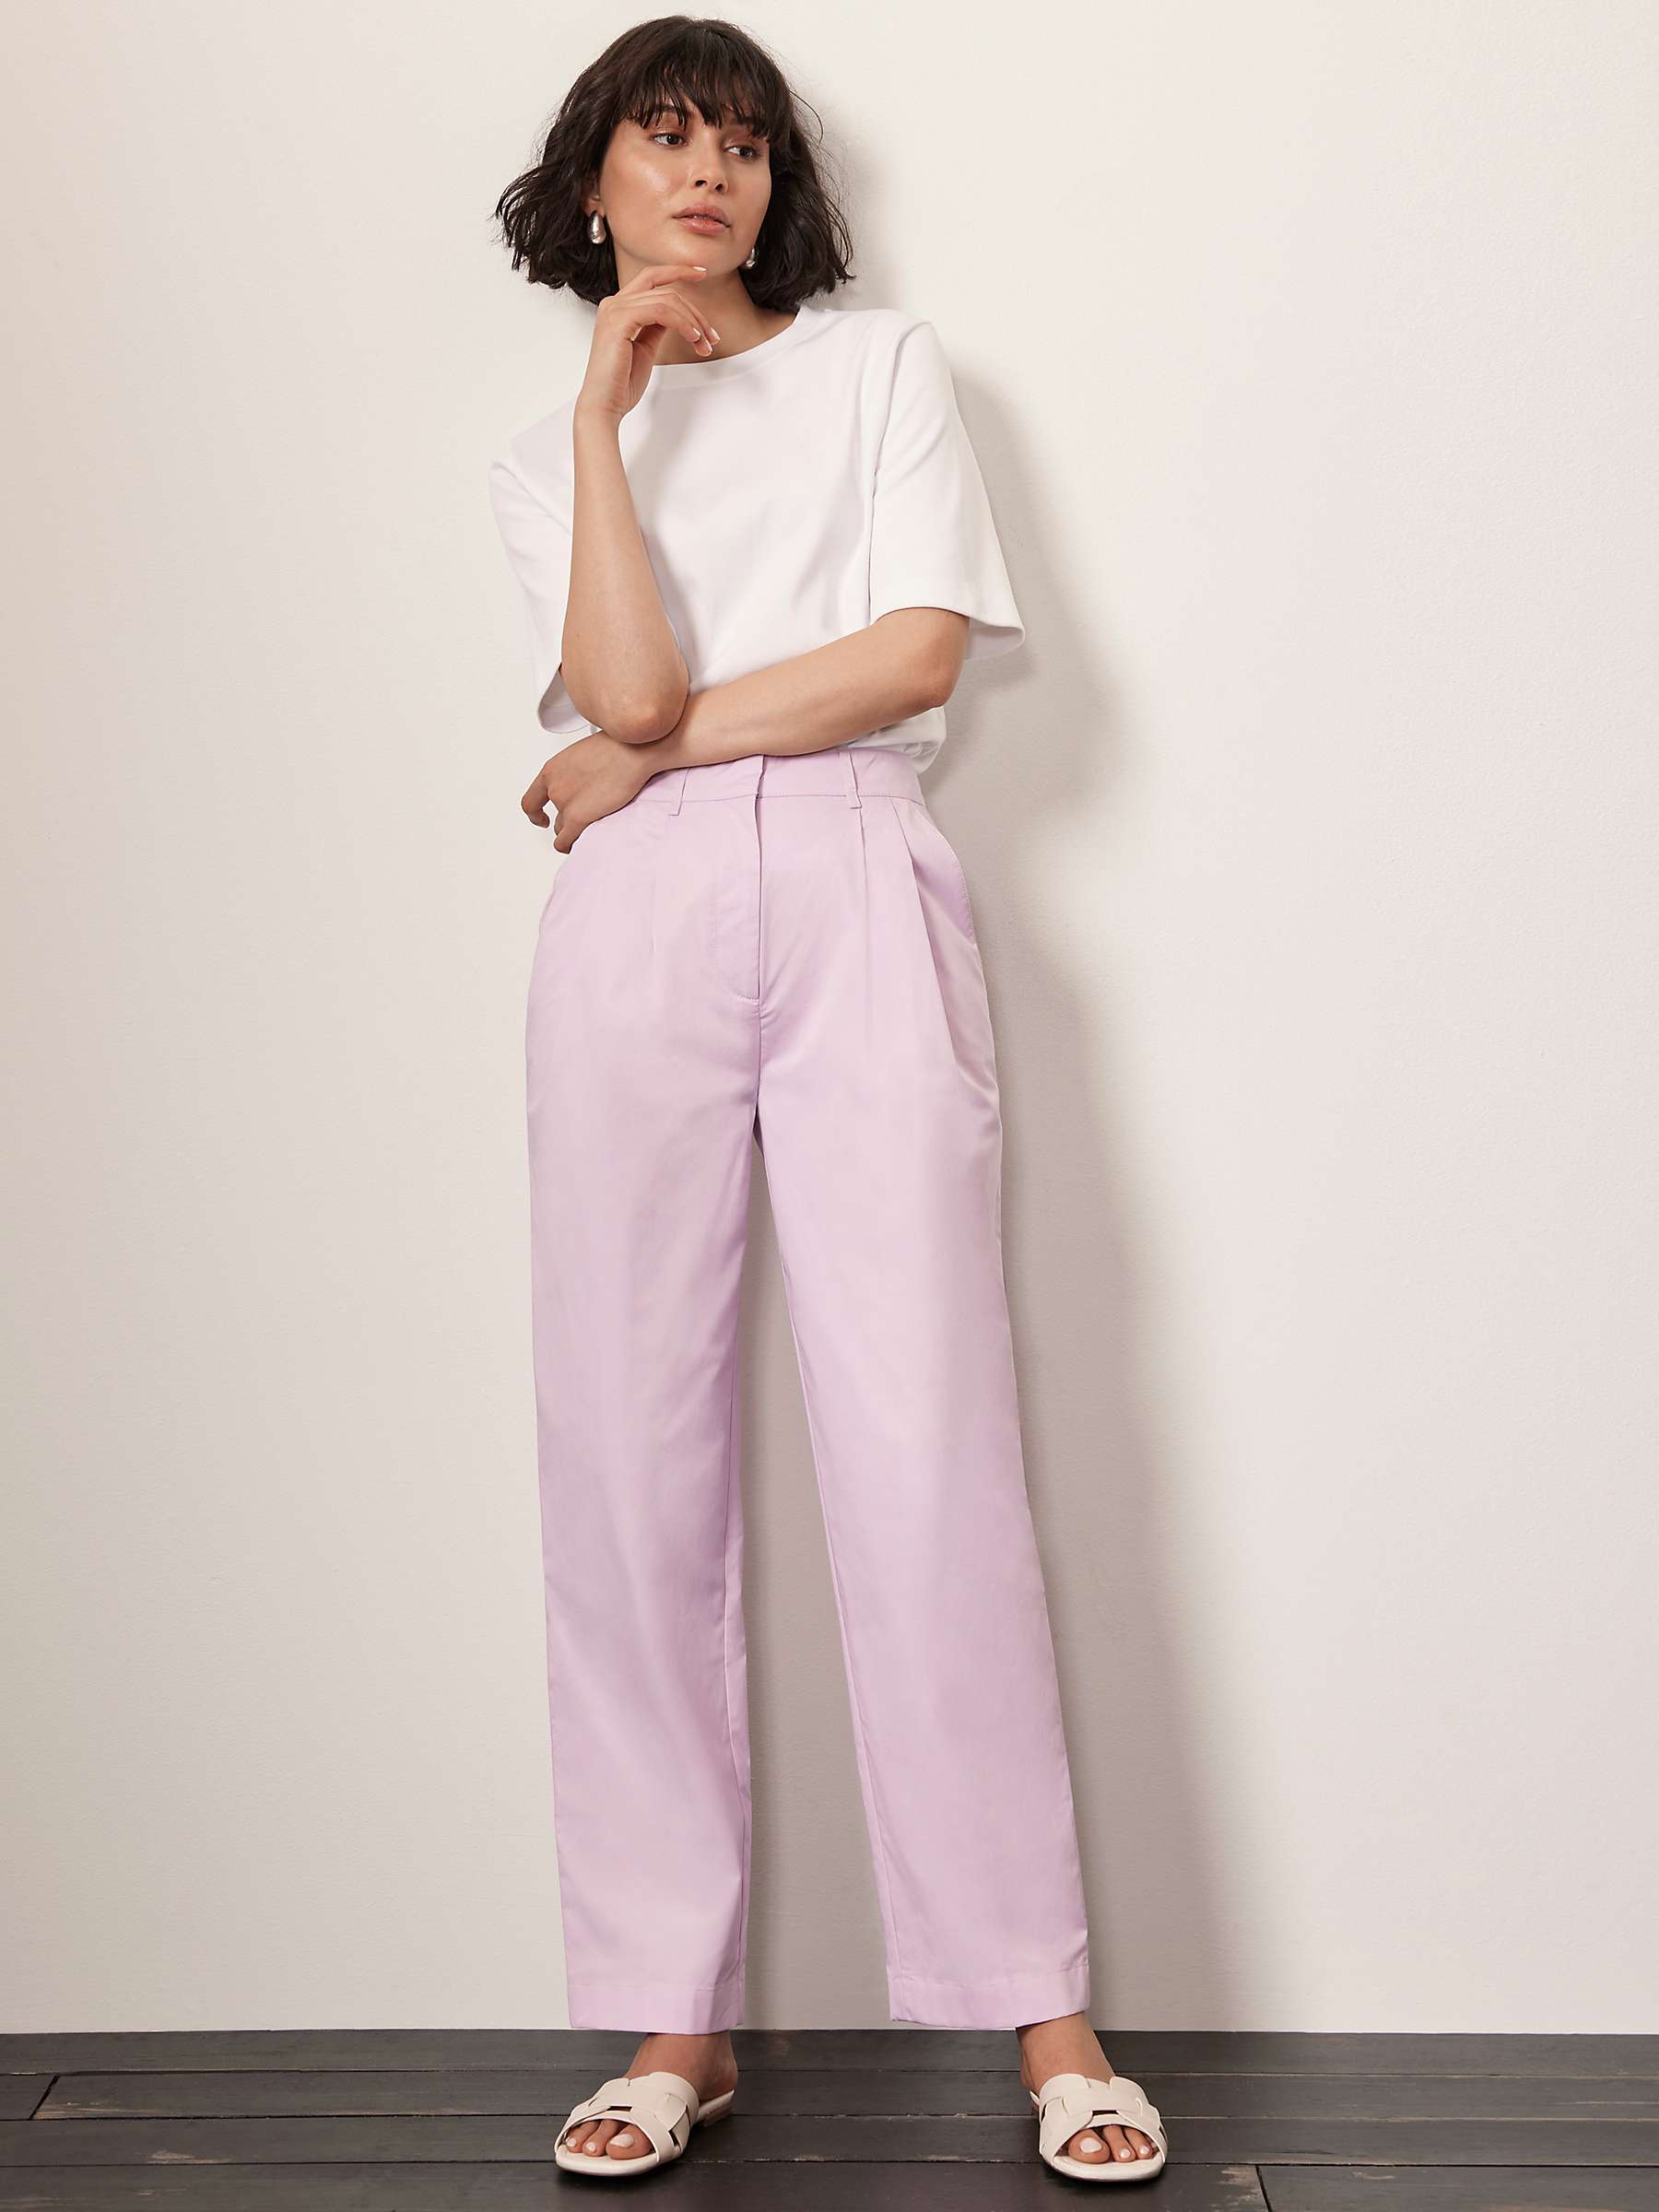 Buy Mint Velvet Pleat Front Tapered Cotton Trousers Online at johnlewis.com